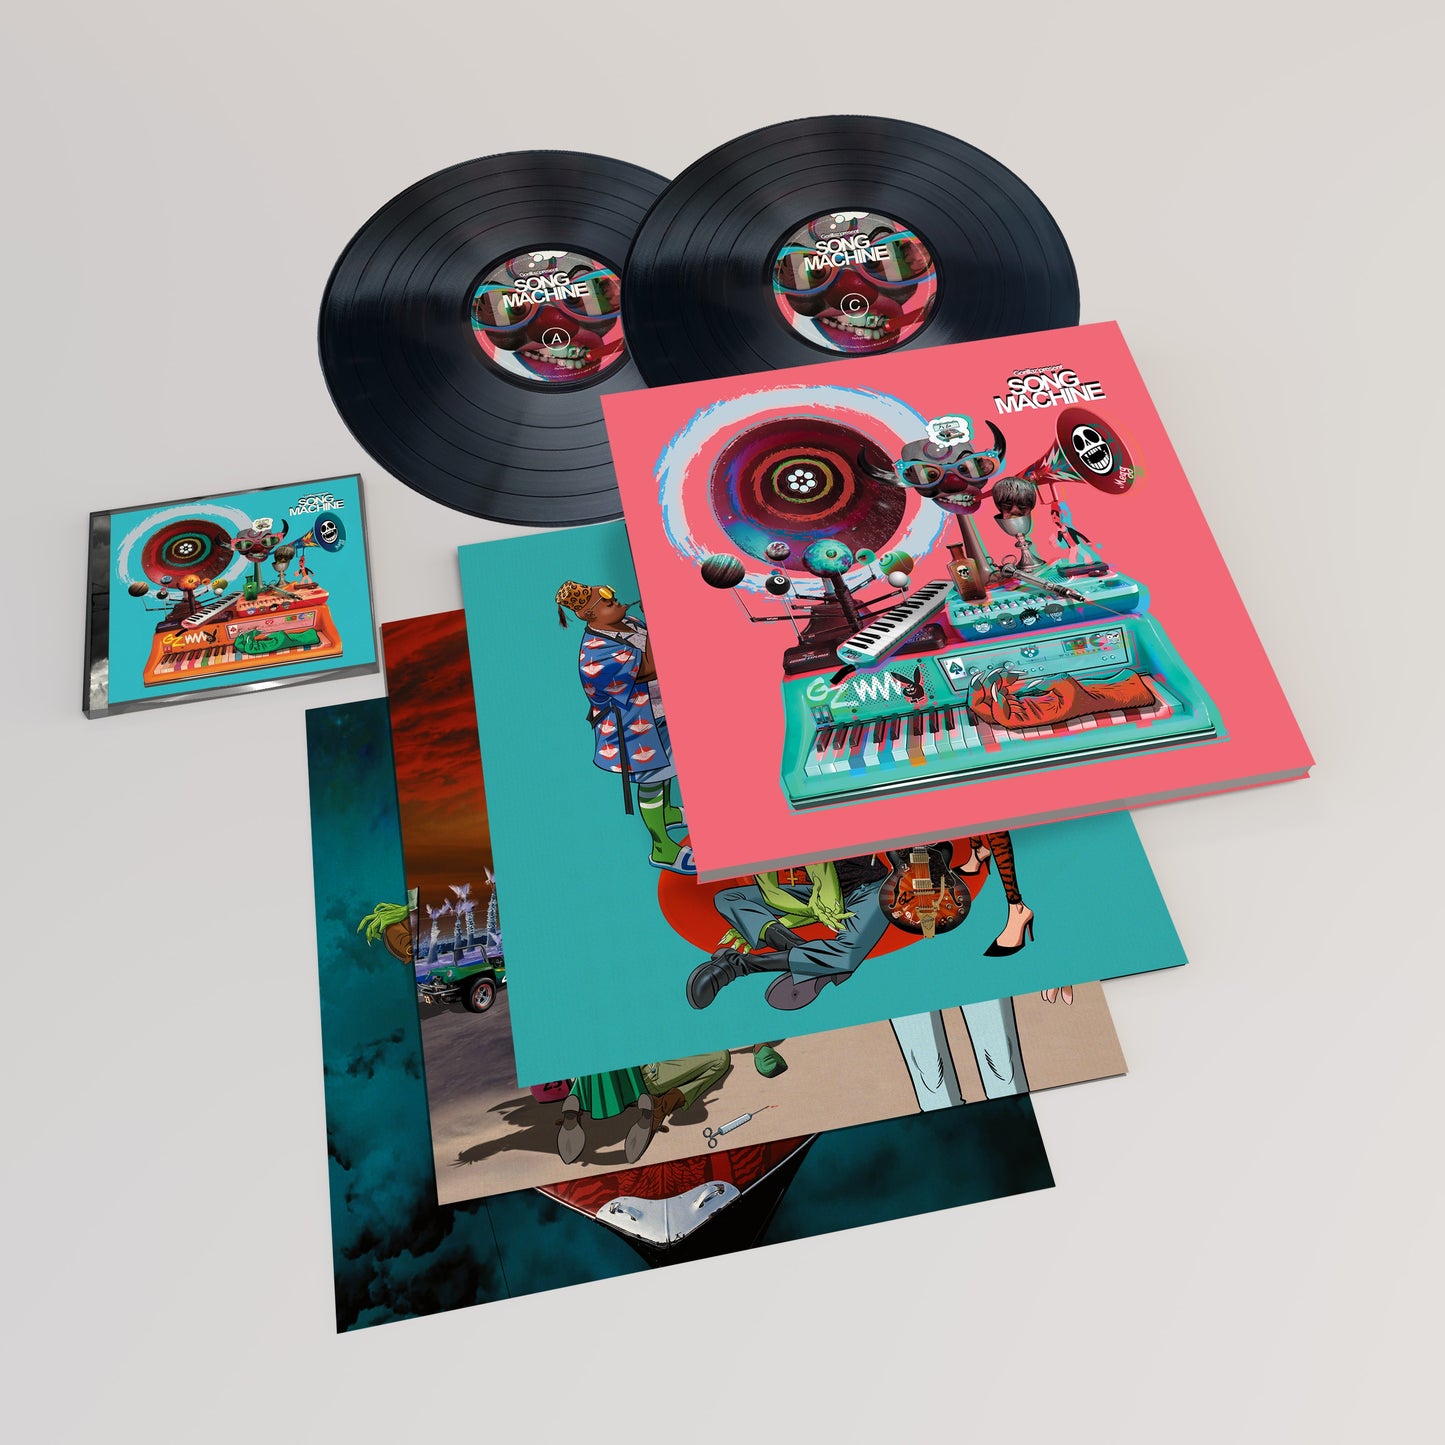 SONG MACHINE, SEASON ONE LIMITED DELUXE VINYL